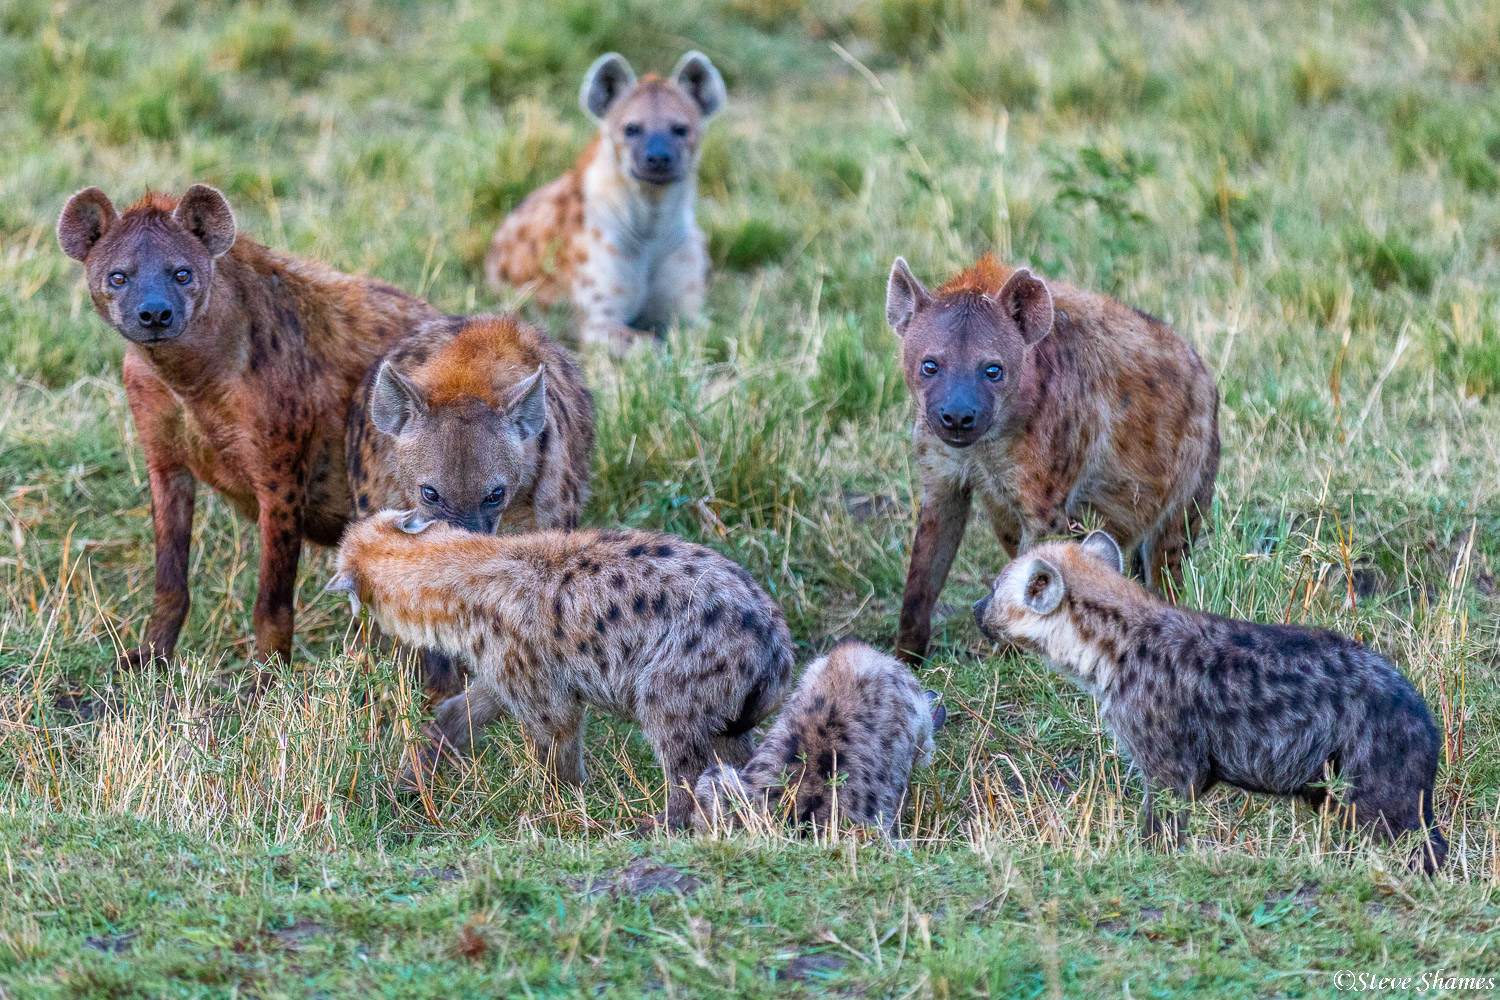 Hyena clan milling around in the early morning light.